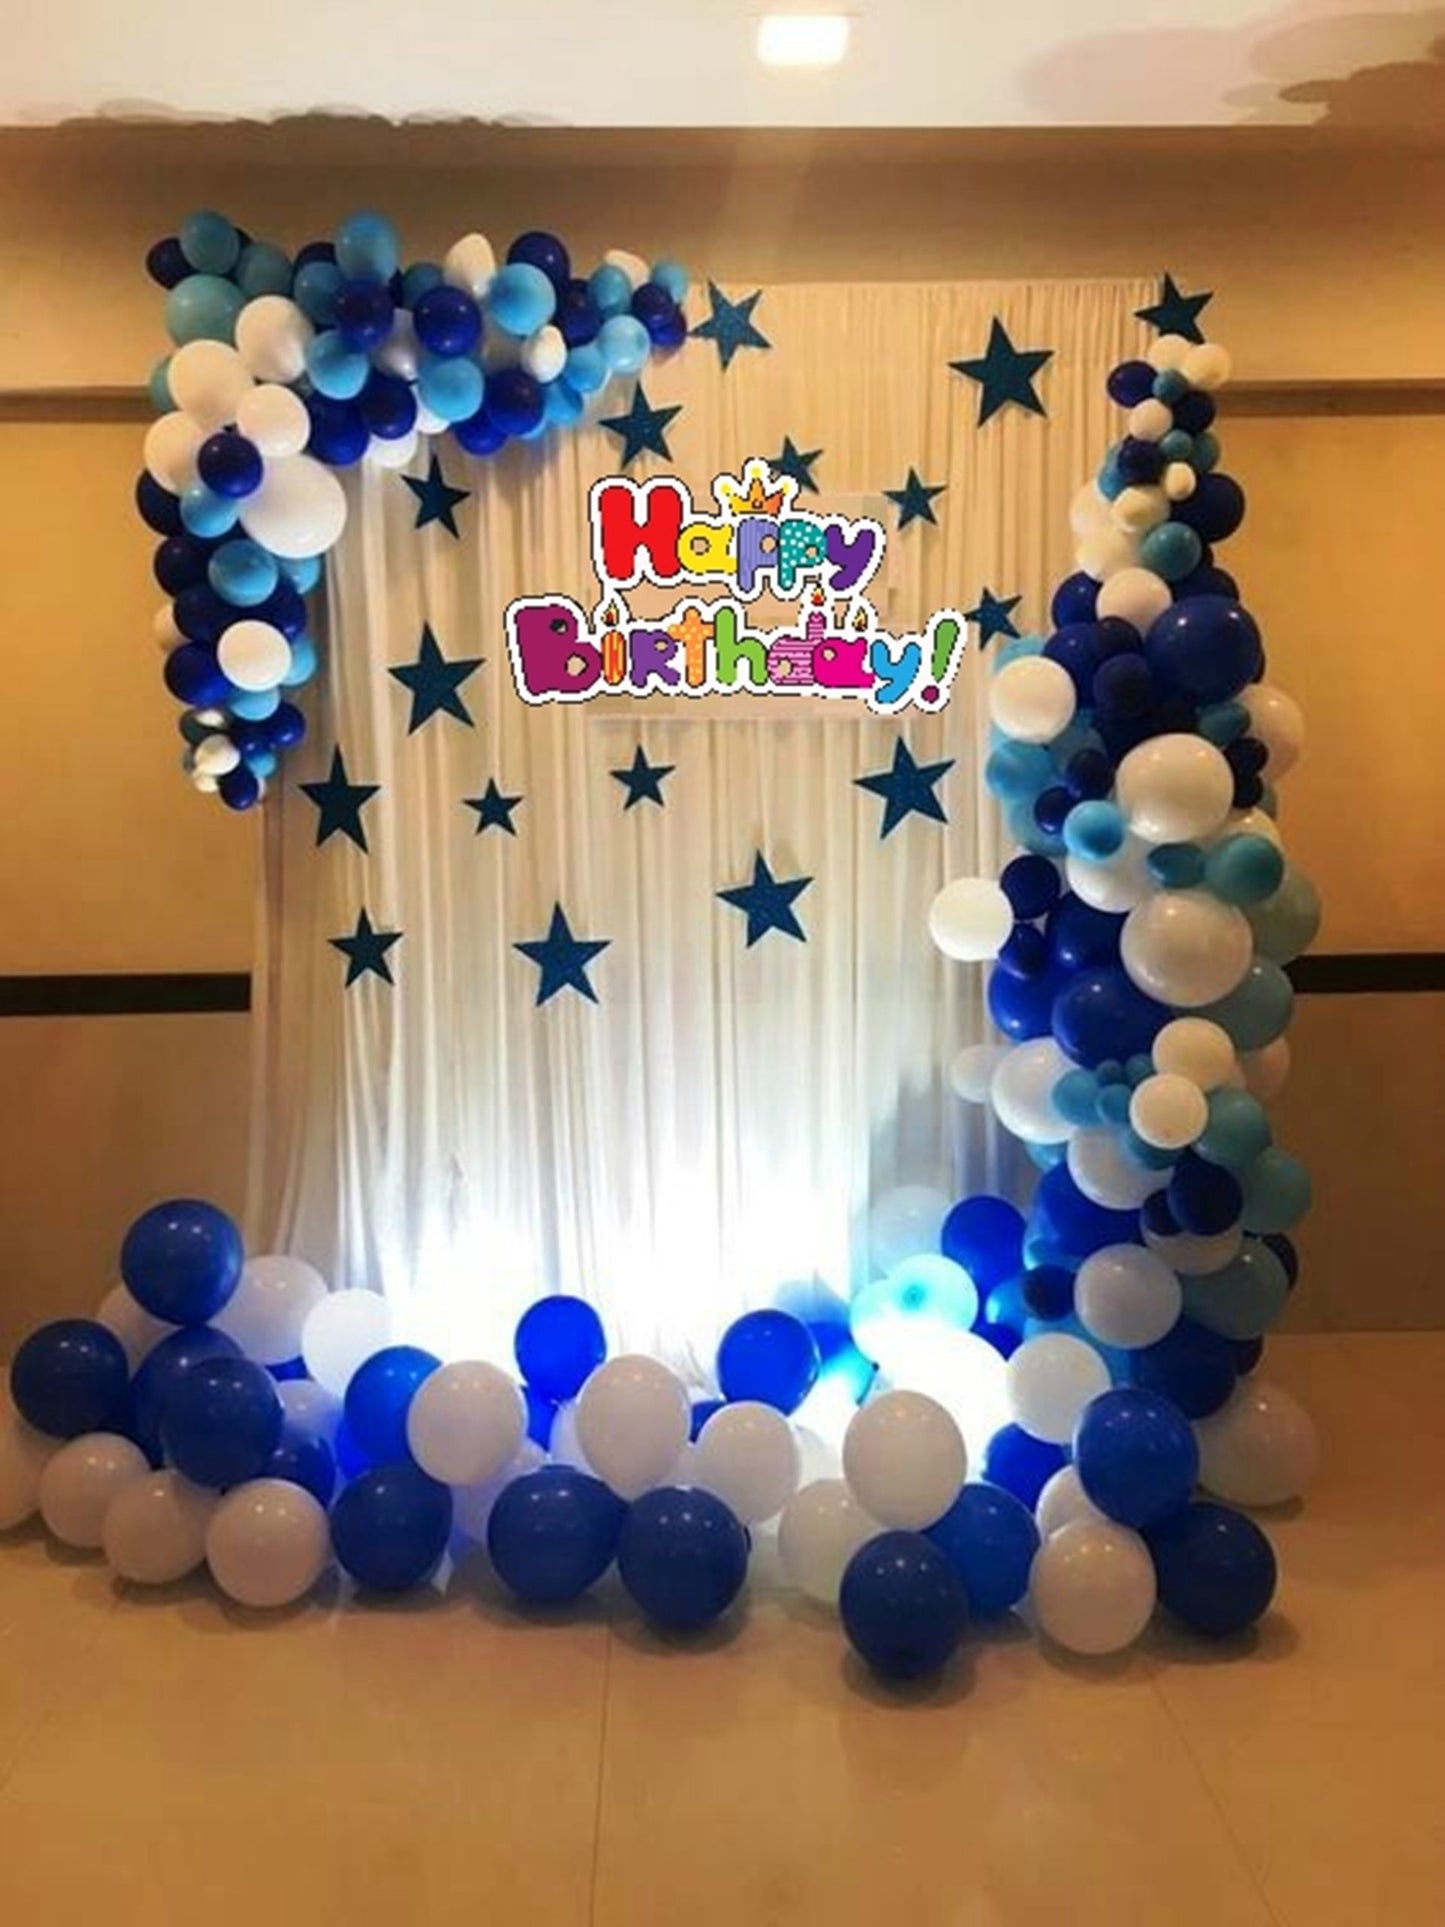 Dark Blue Balloon Pack of 25 for birthday decoration, Anniversary Weddings Engagement, Baby Shower, New Year decoration, Theme Party balloons